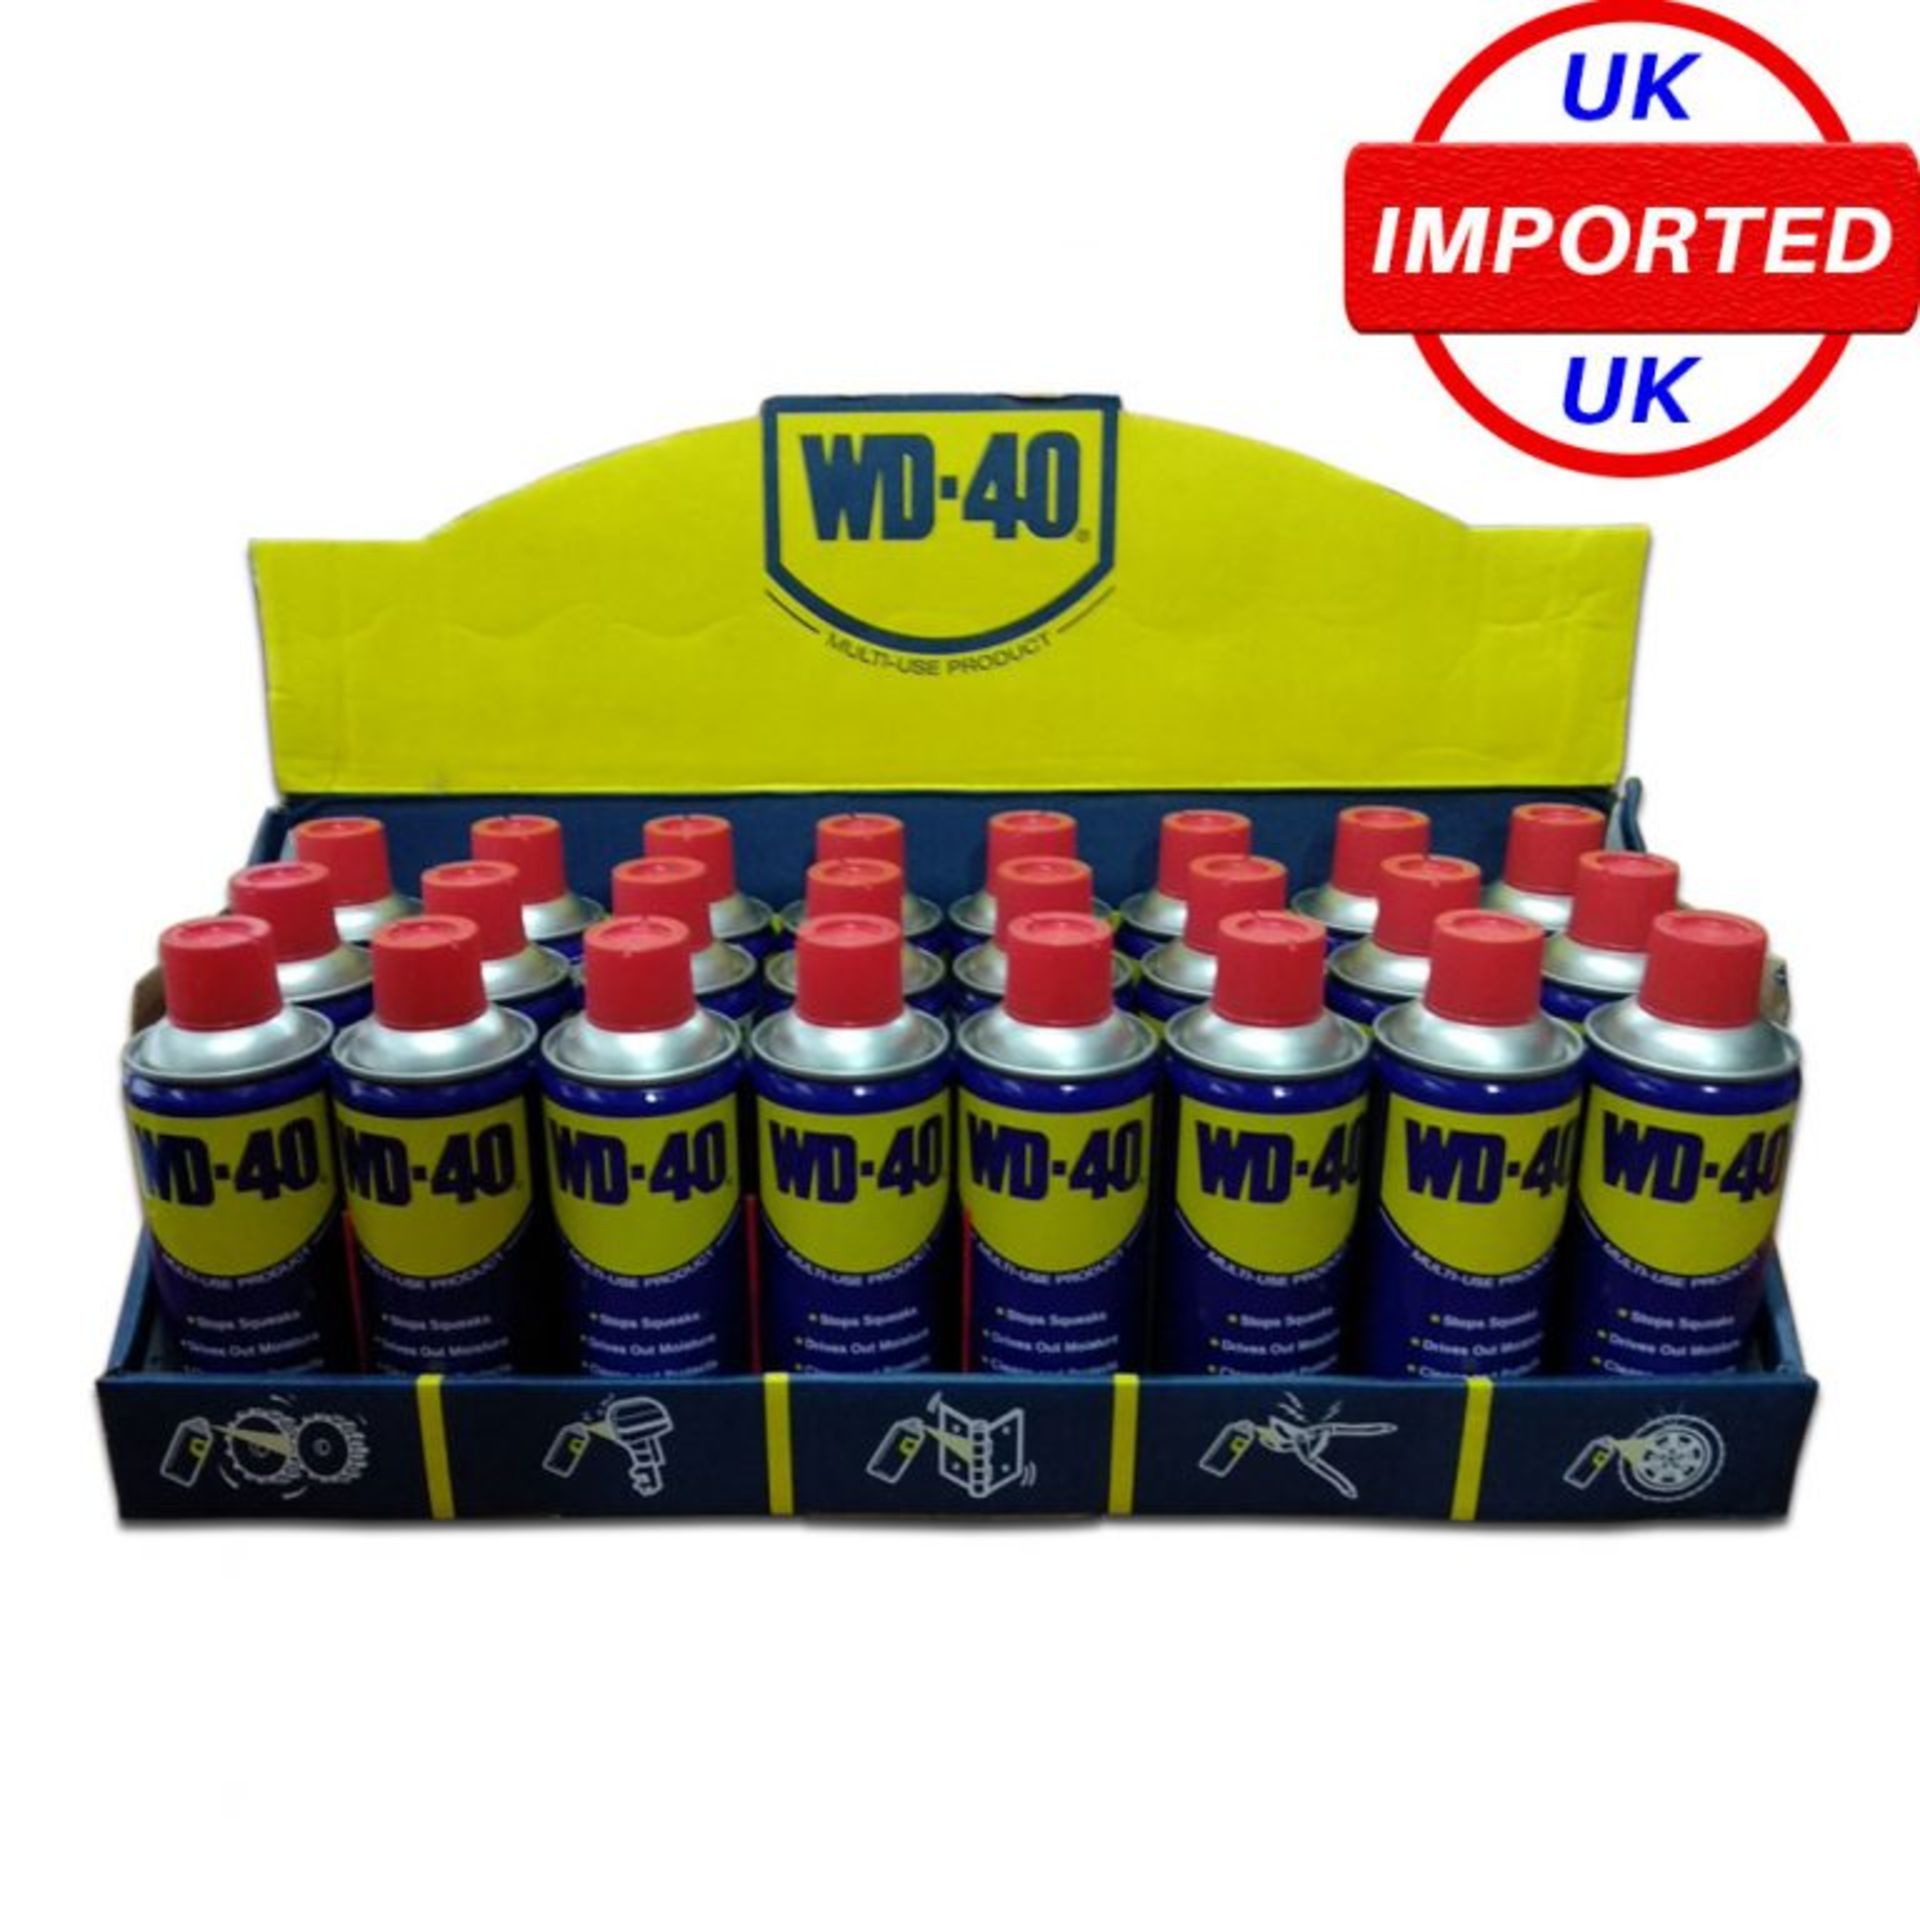 100pcs Brand new Sealed WD40 330ml cans new and sealed . Includes 1 x retail CDU in lot that